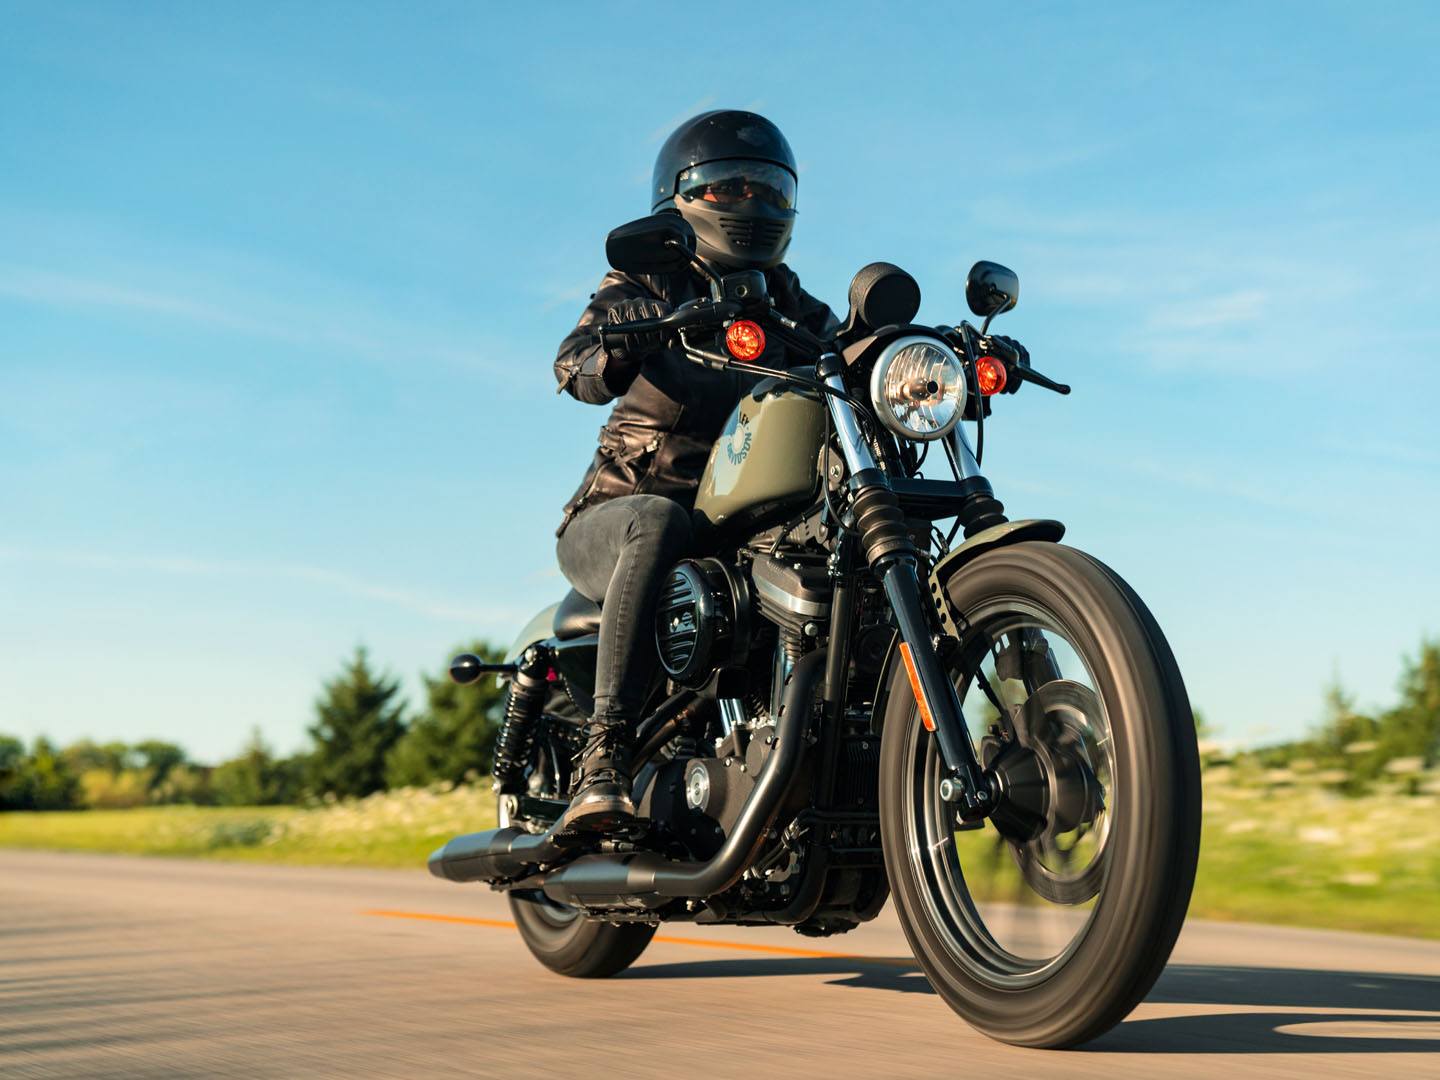 2021 Harley-Davidson Iron 883™ in Knoxville, Tennessee - Photo 18